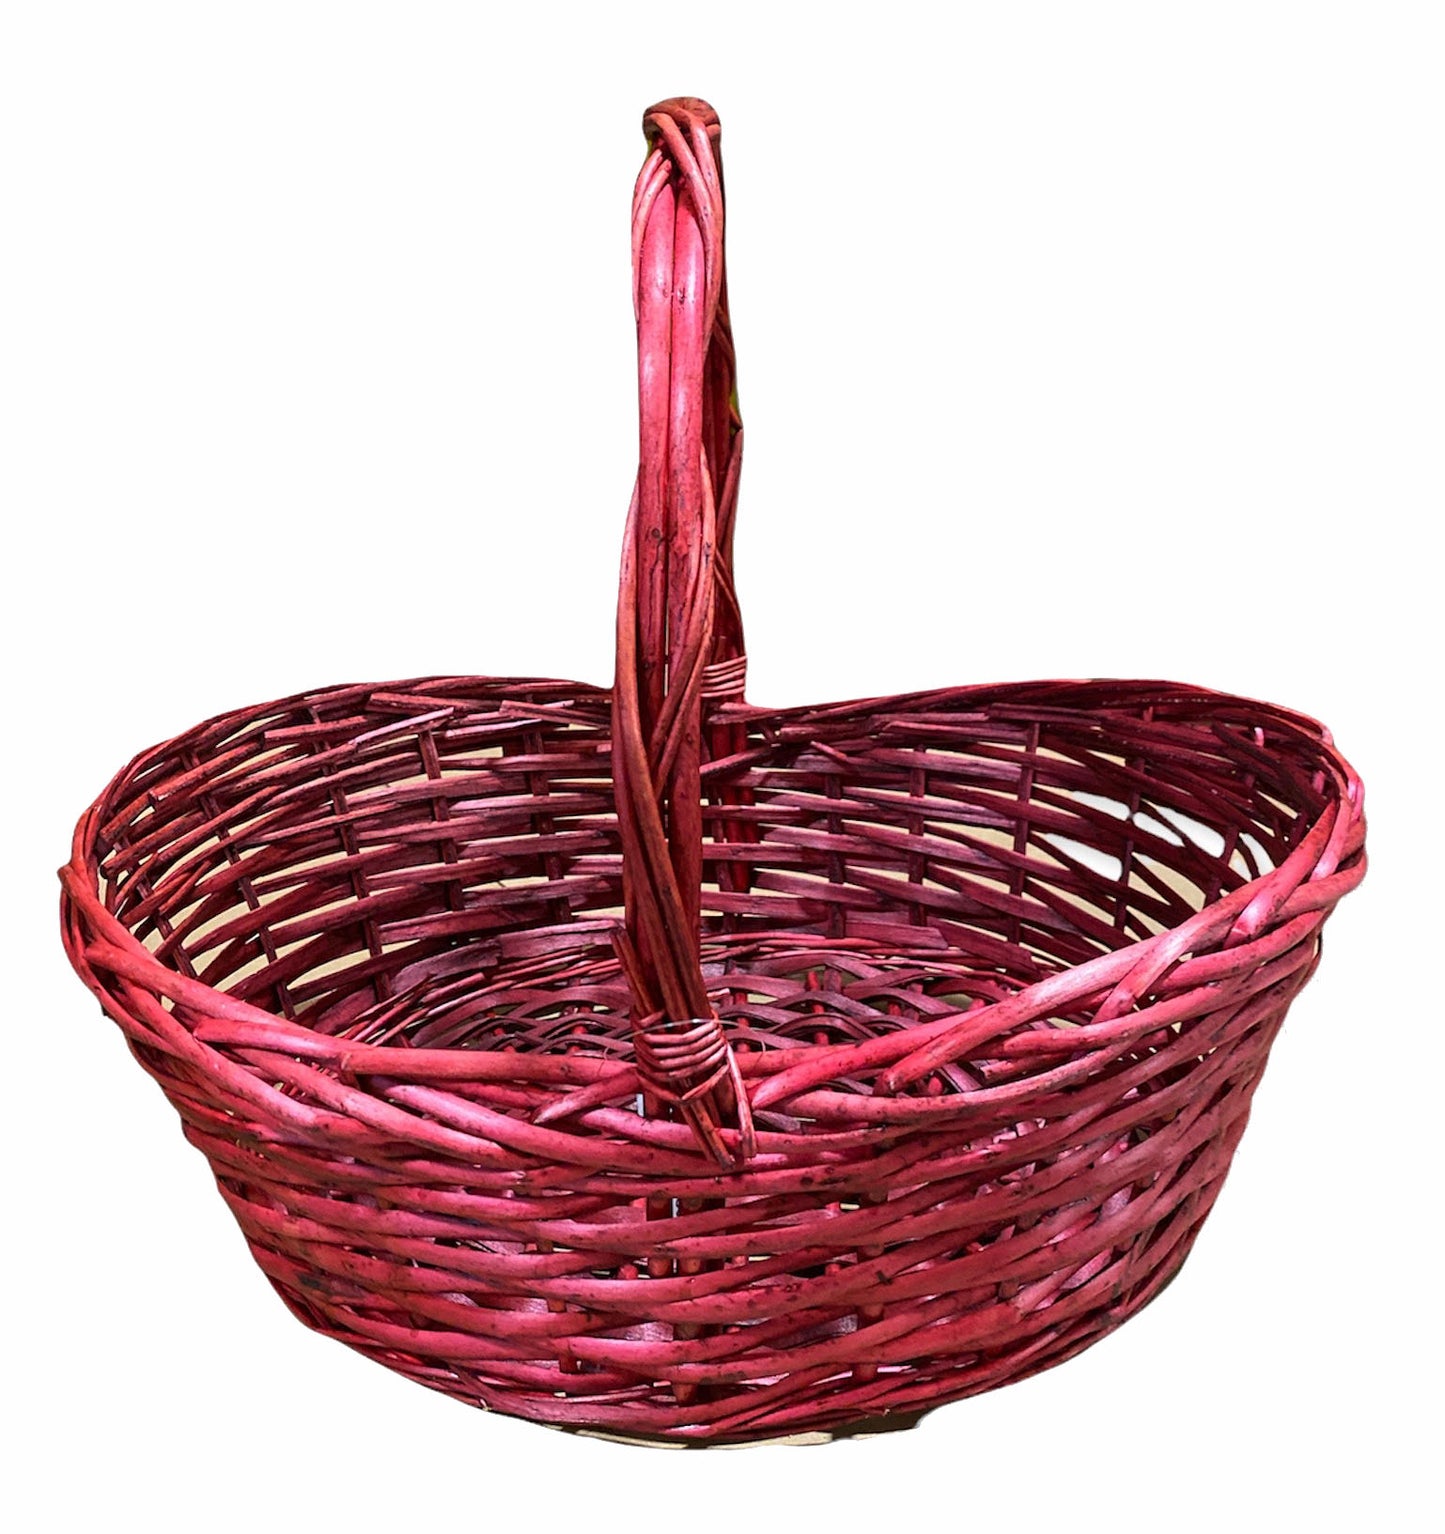 Oval Willow Baskets - Wine - XL - 20 x 14.5 x 6 x 18 inches